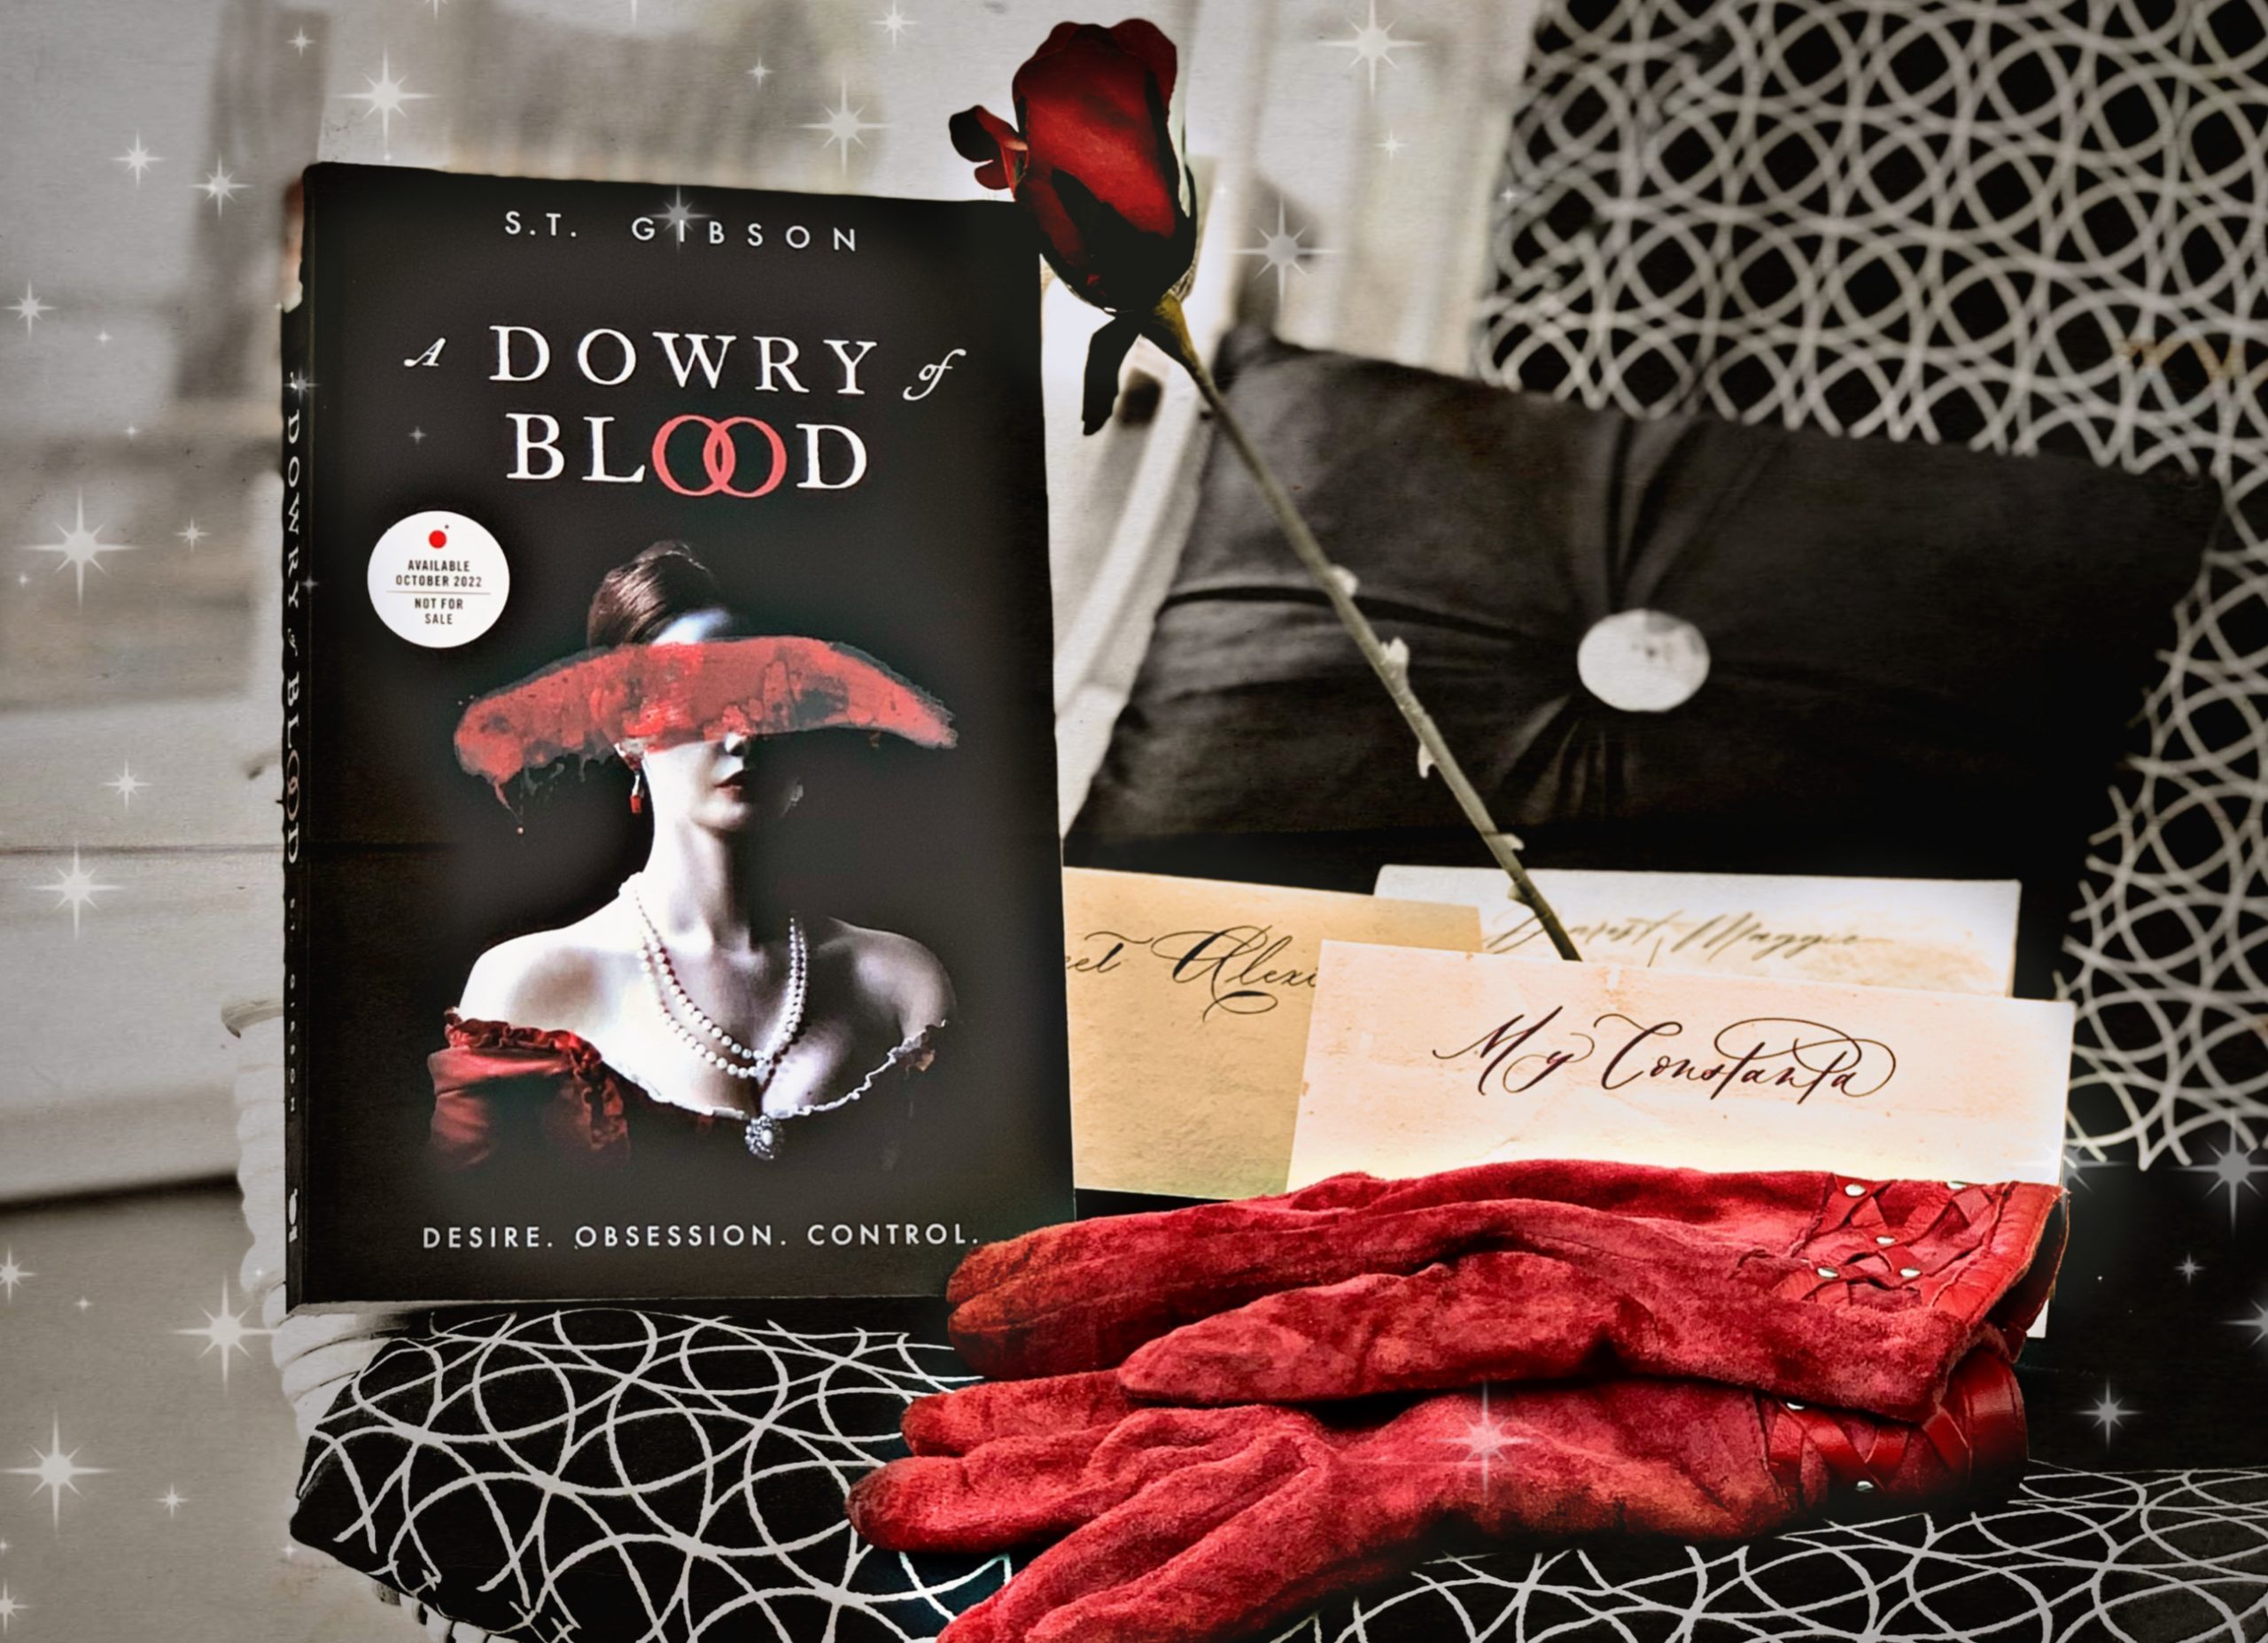 a dowry of blood paperback used